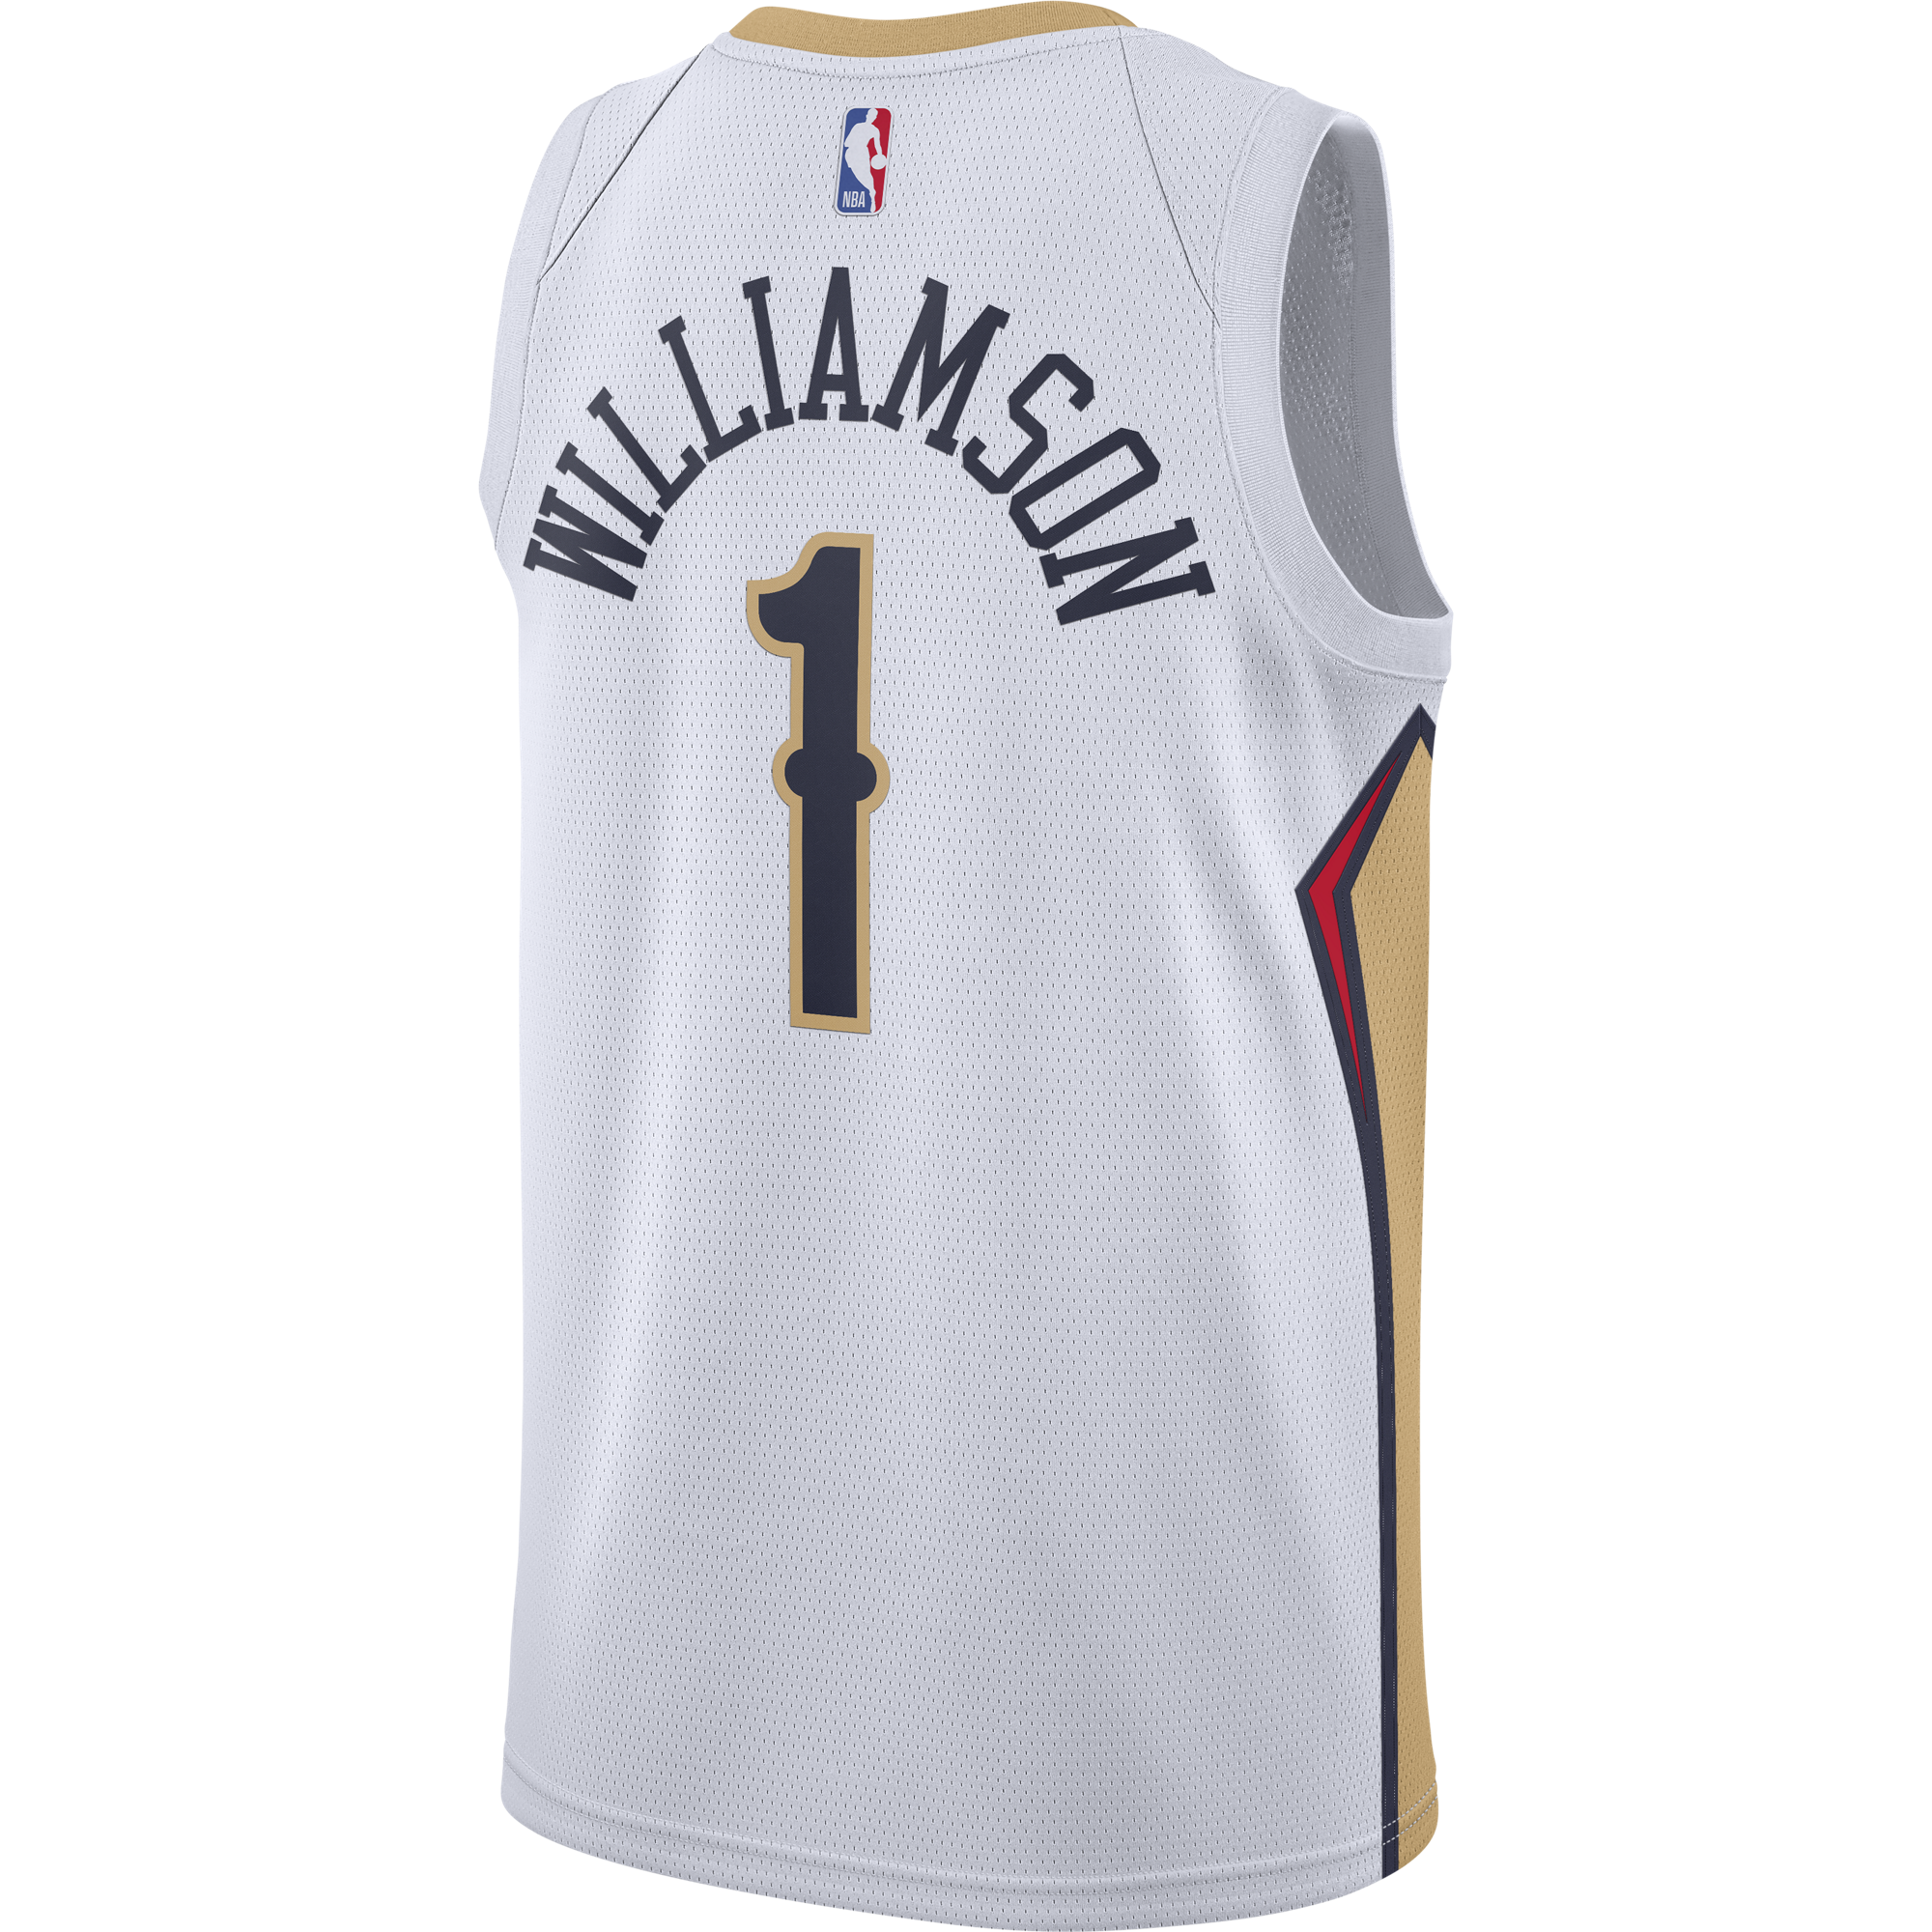 Nike Williamson Pelicans Statement Edition Jersey Red/Black/Gold